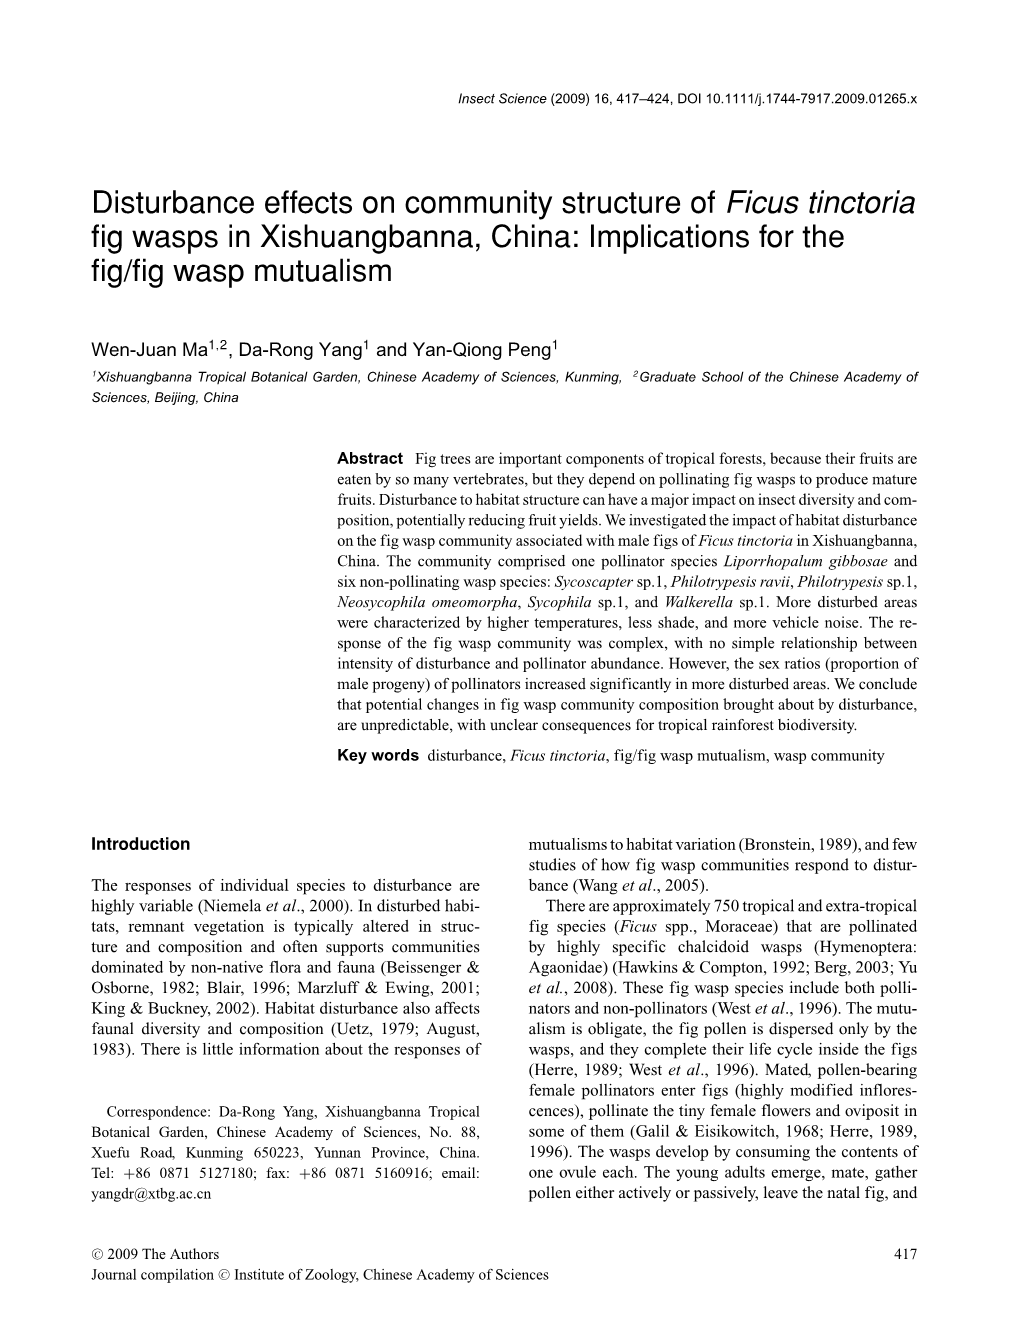 Disturbance Effects on Community Structure of Ficus Tinctoria ﬁg Wasps in Xishuangbanna, China: Implications for the ﬁg/ﬁg Wasp Mutualism